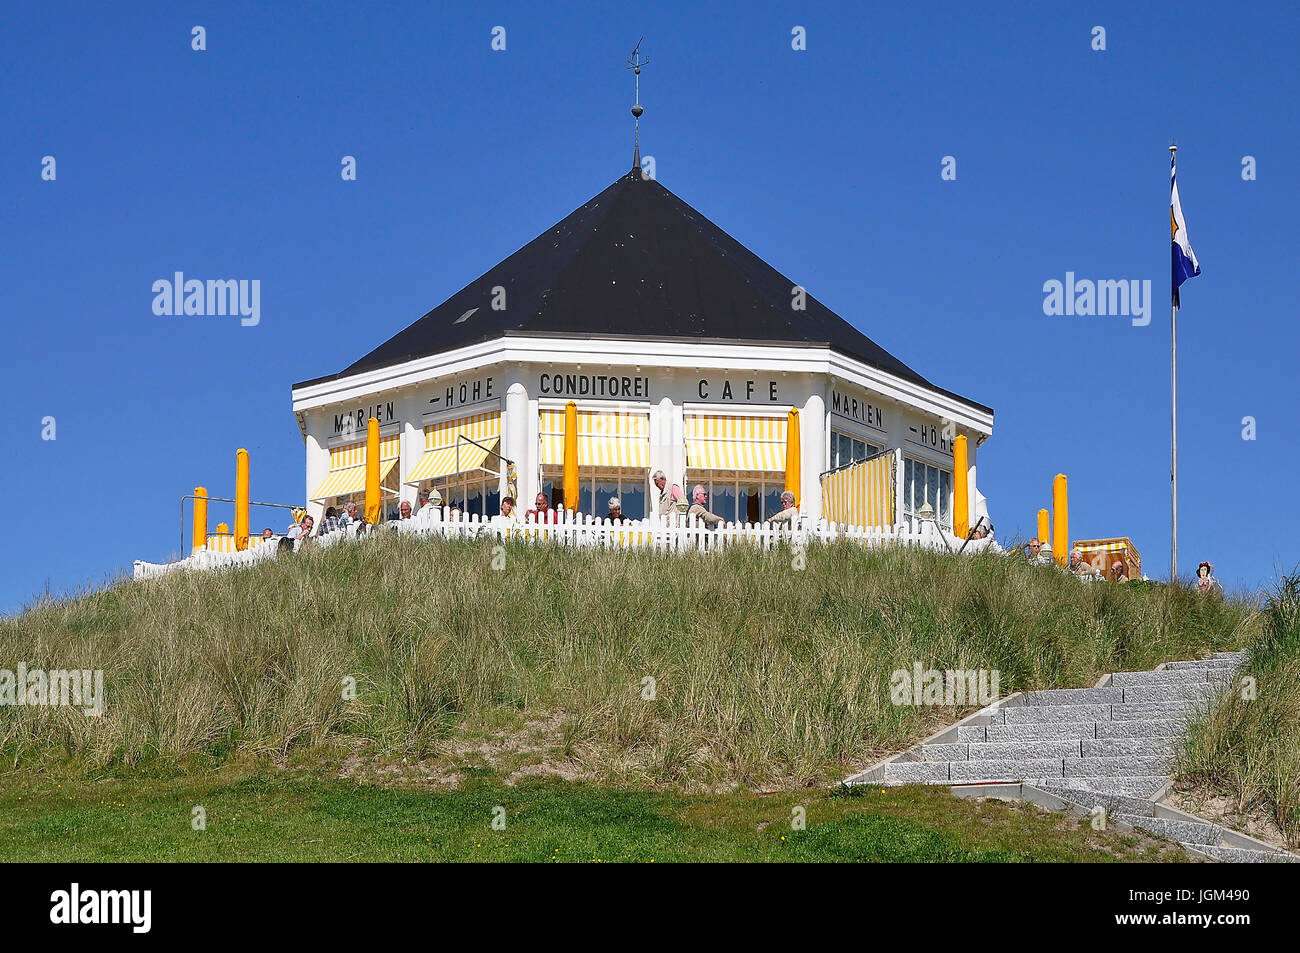 Europe, the Federal Republic of Germany, Lower Saxony, East Friesland, Norderney, island, island Norderney, East Frisian island, Marien's height, cafe Stock Photo